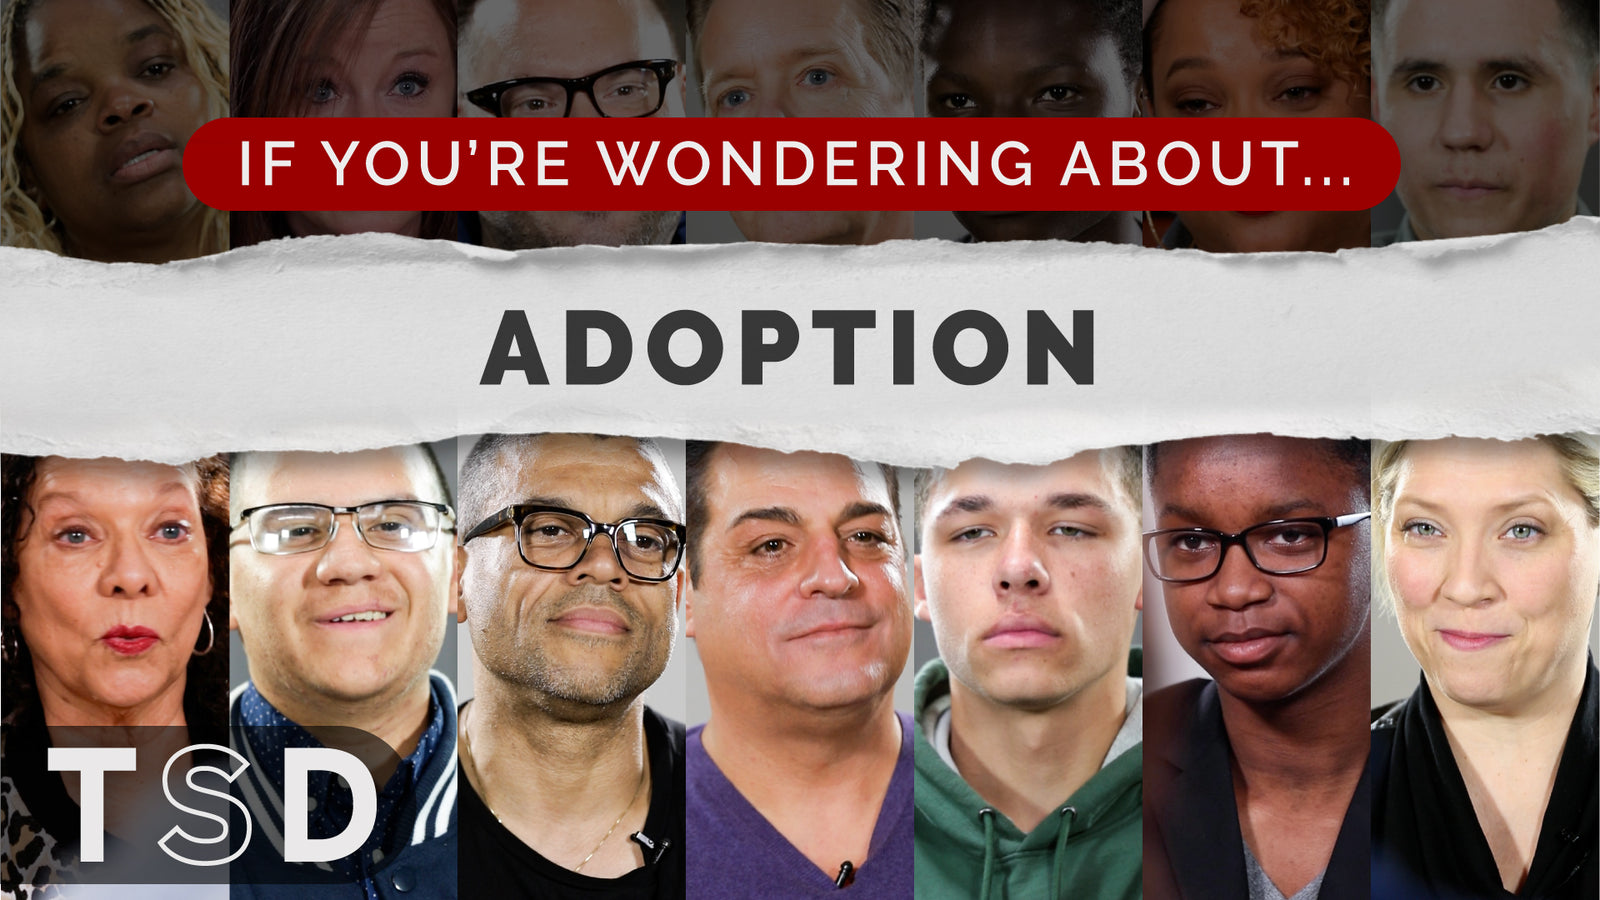 [VIDEO] If You're Wondering About... Adoption